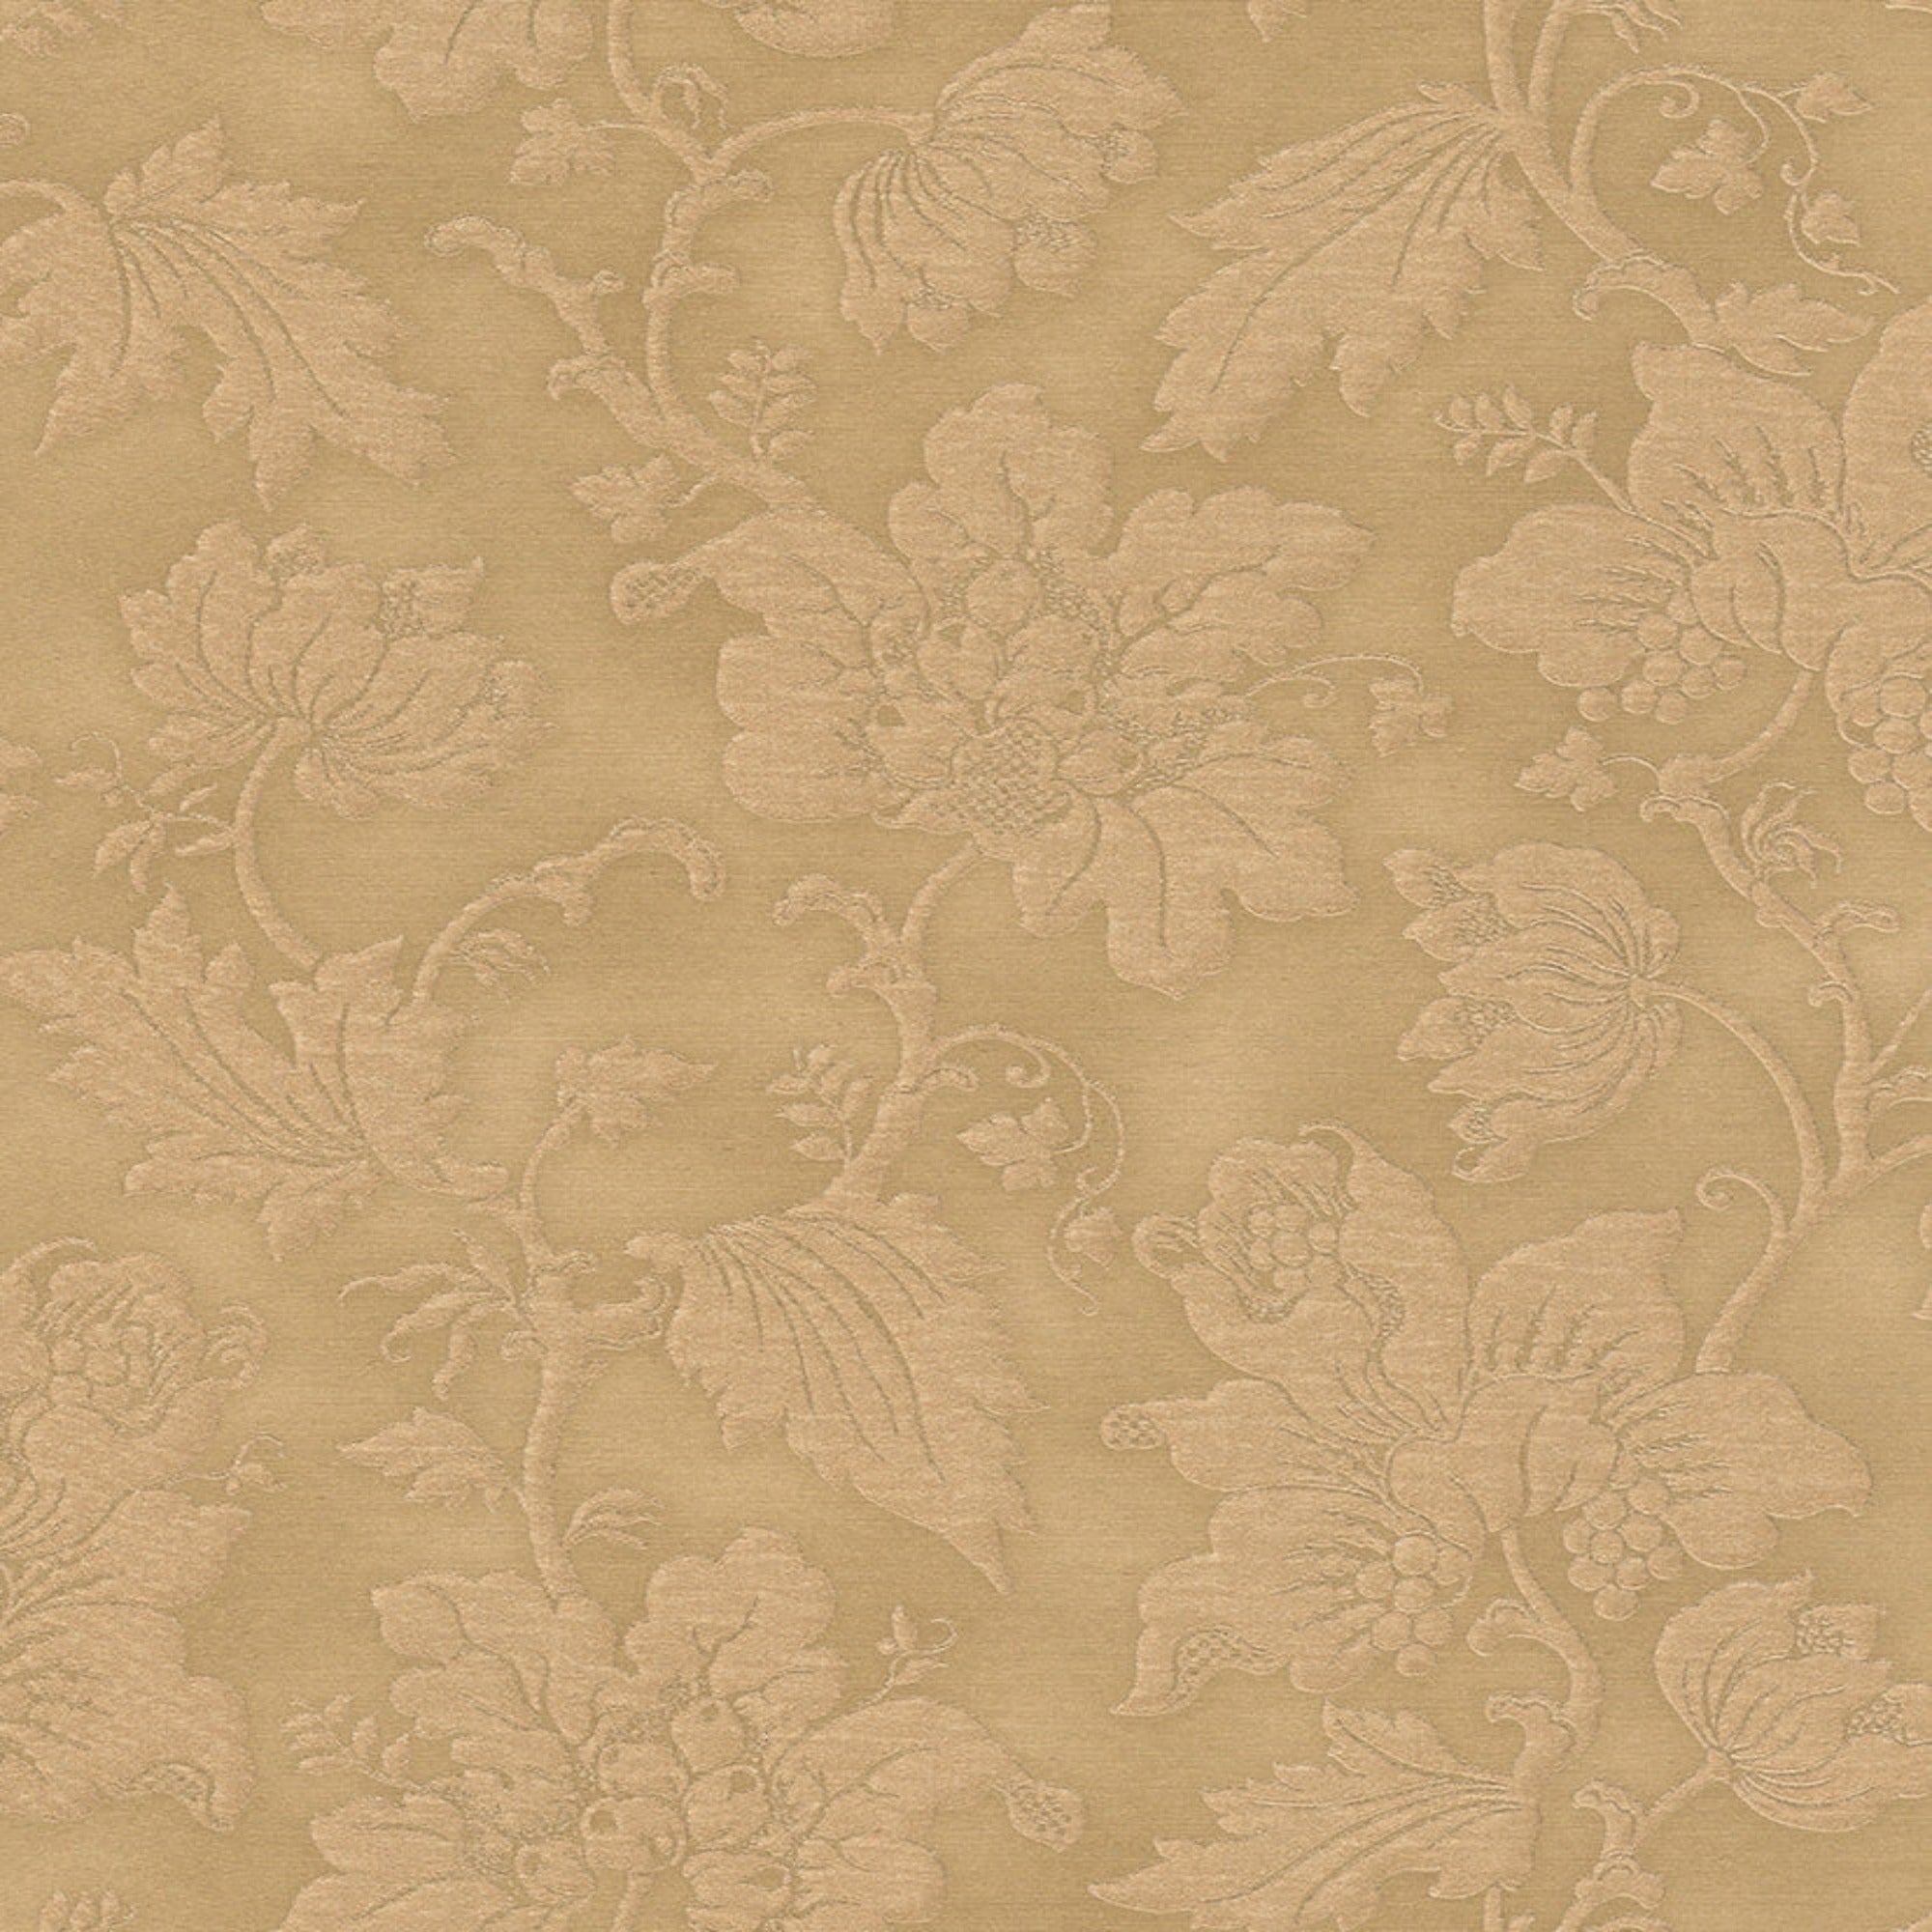 Trianon Baroque Gold | WonderWall by Nobletts